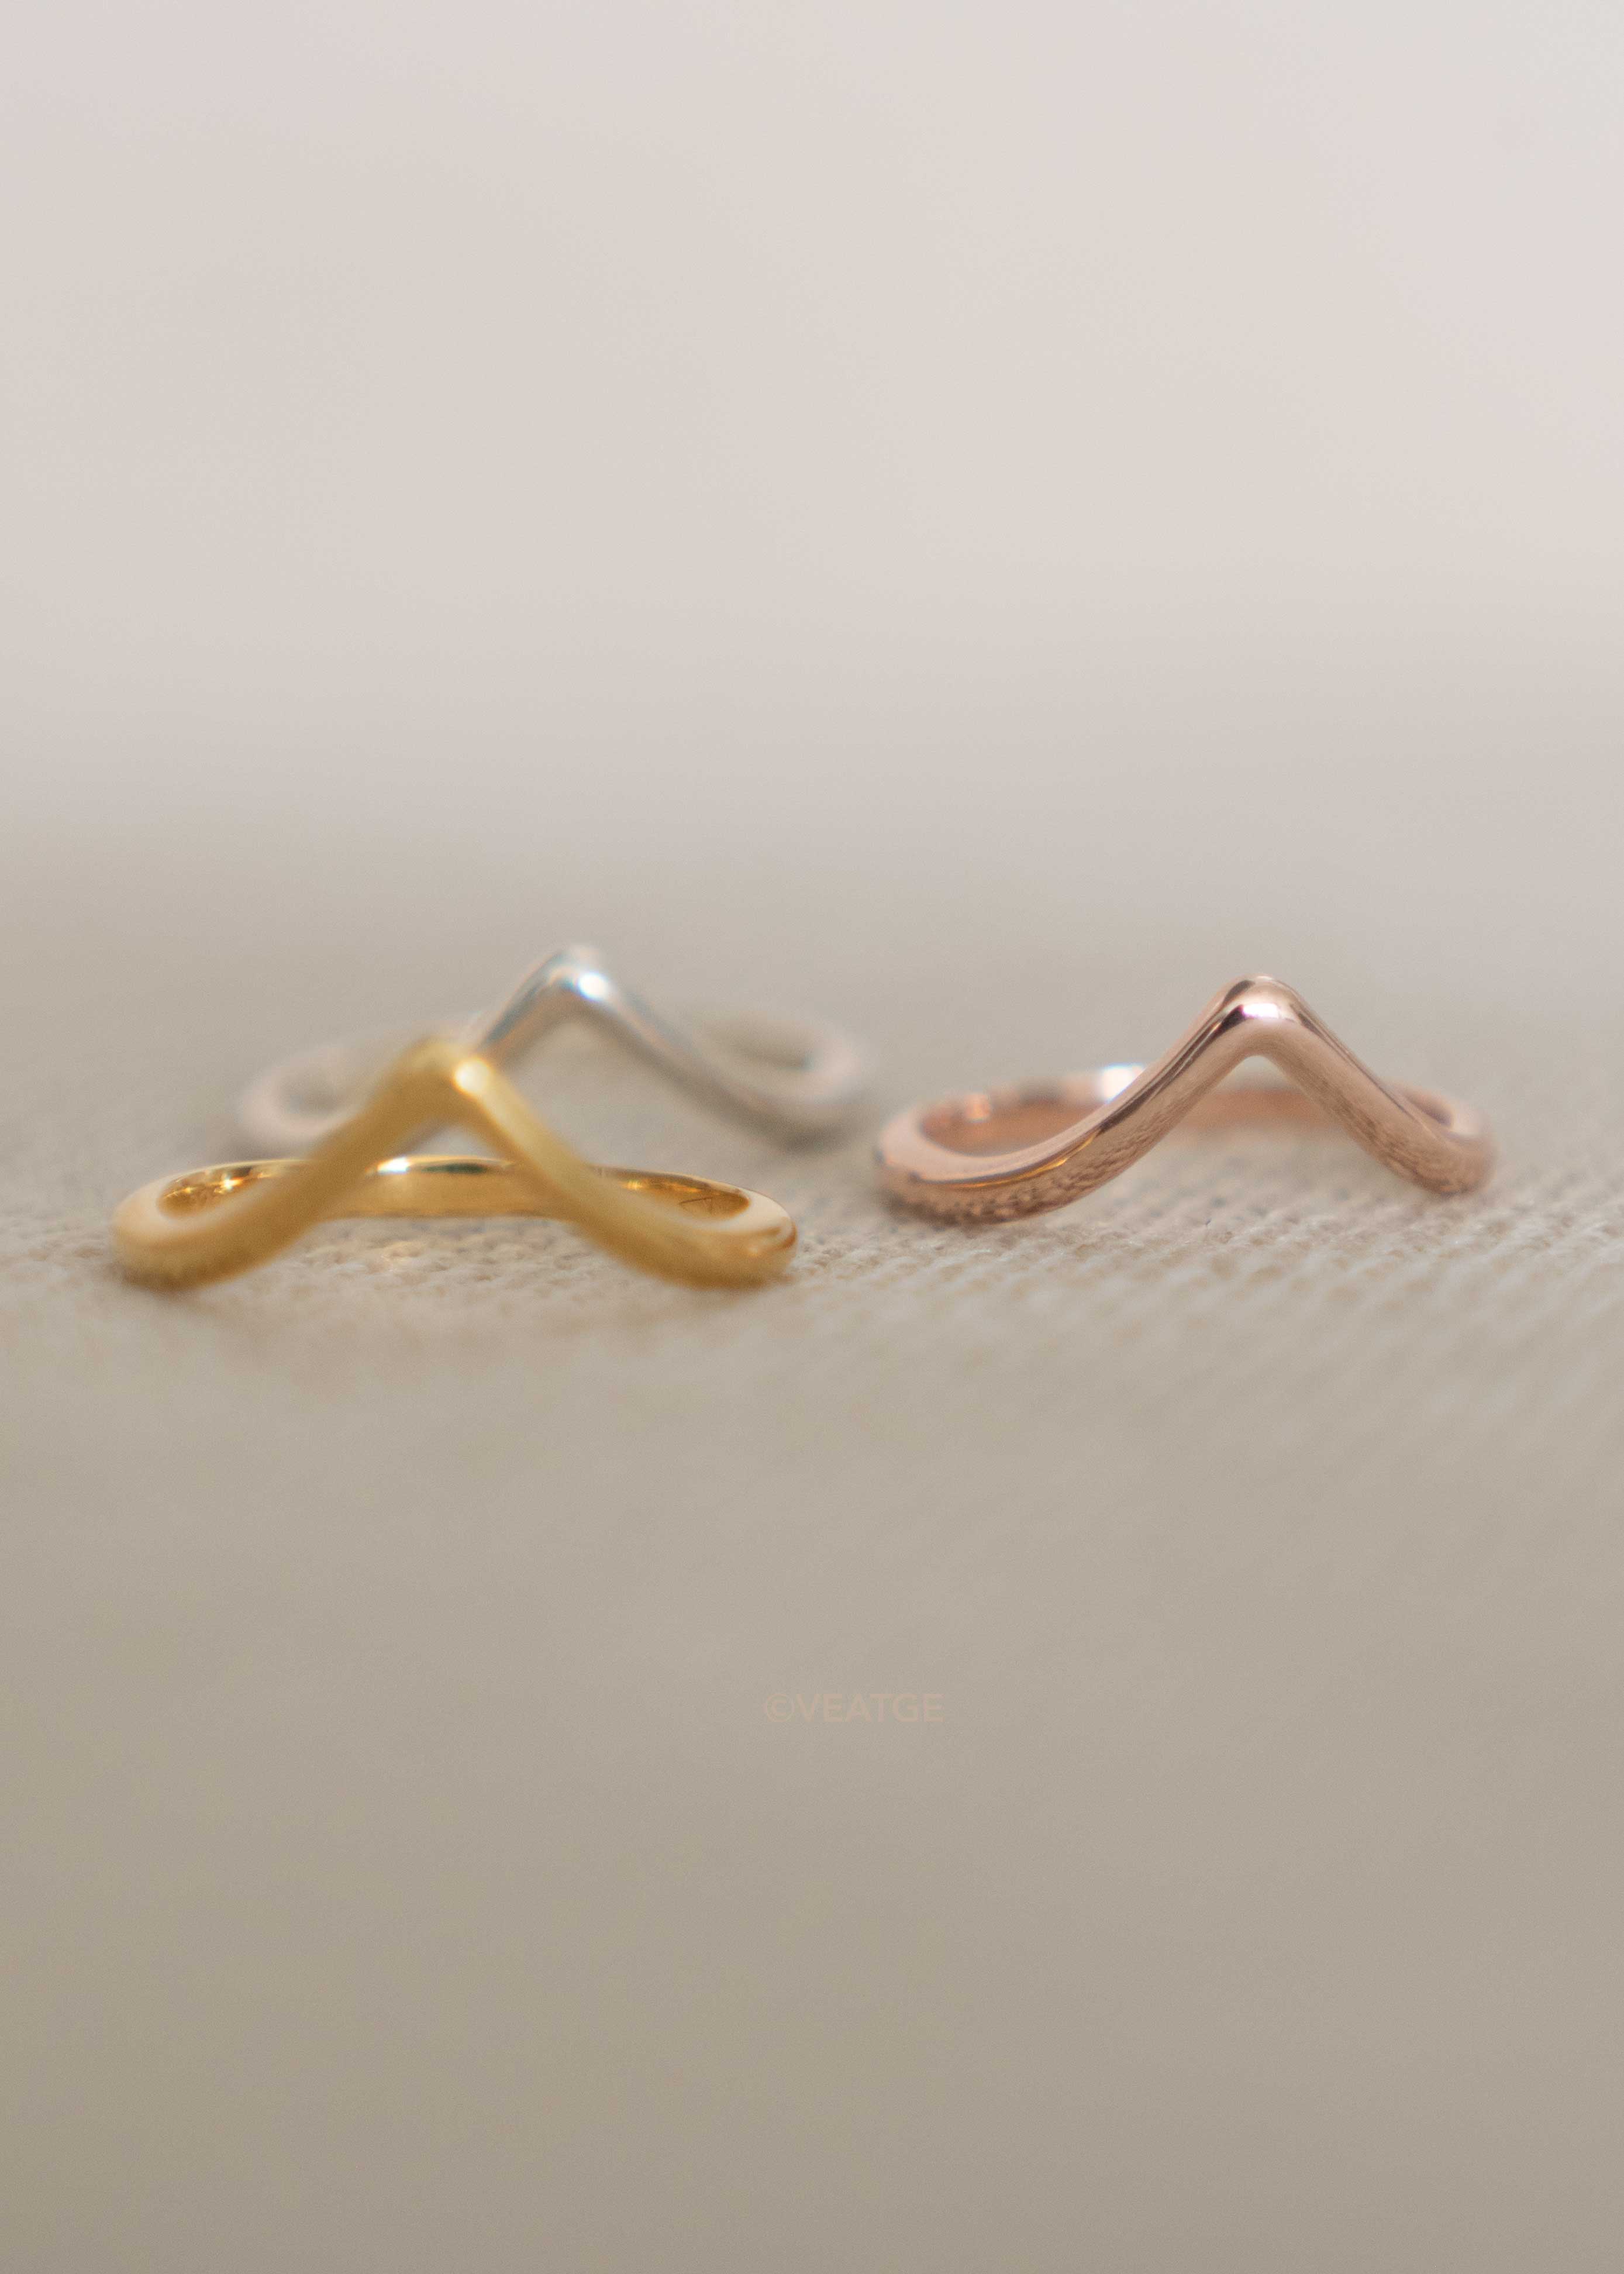 Plain Peak Ring Chevron V Pointy Curved Stackable Wishbone Ring Stacking in Silver Gold Rose Gold